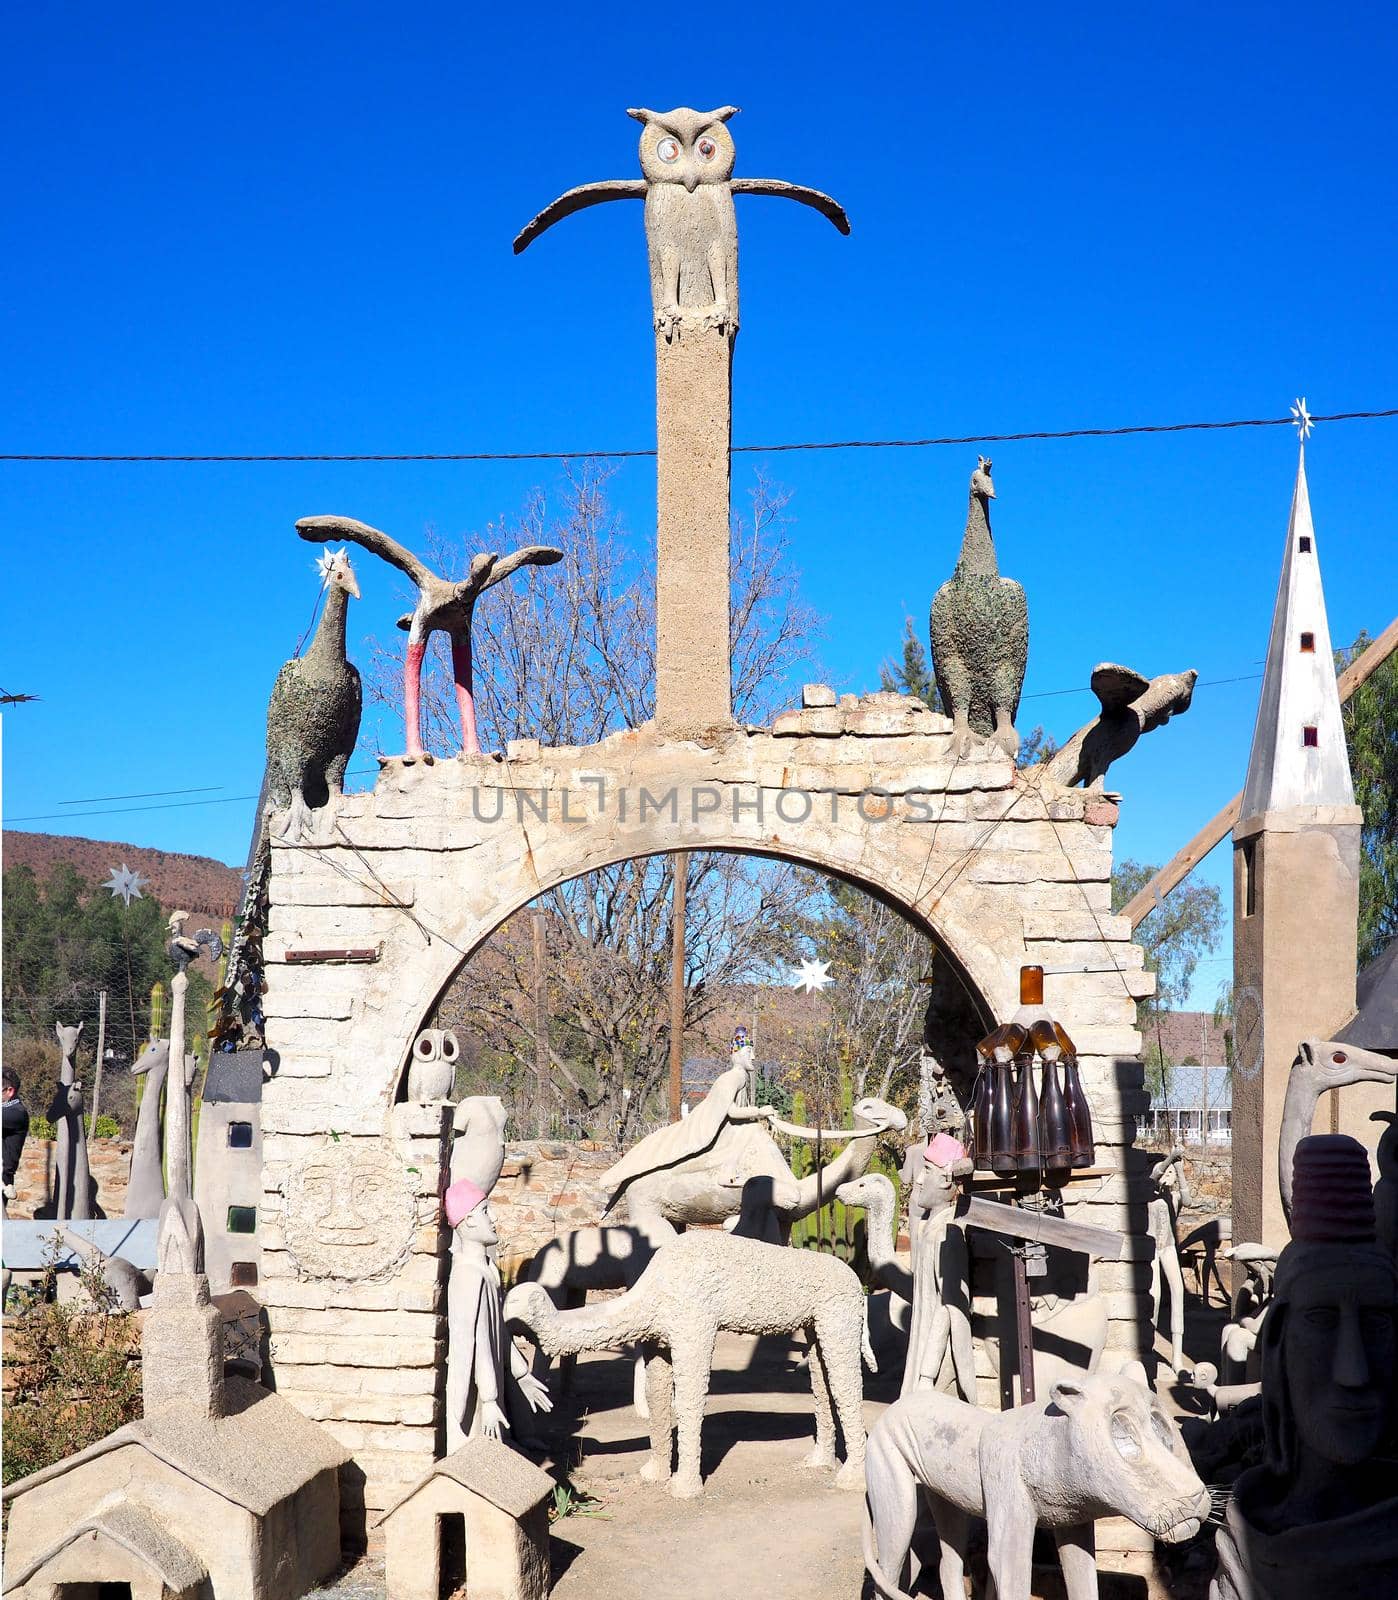 1 July 2019 - Sculptures at the Owl House, Nieu Bethesda, South Africa